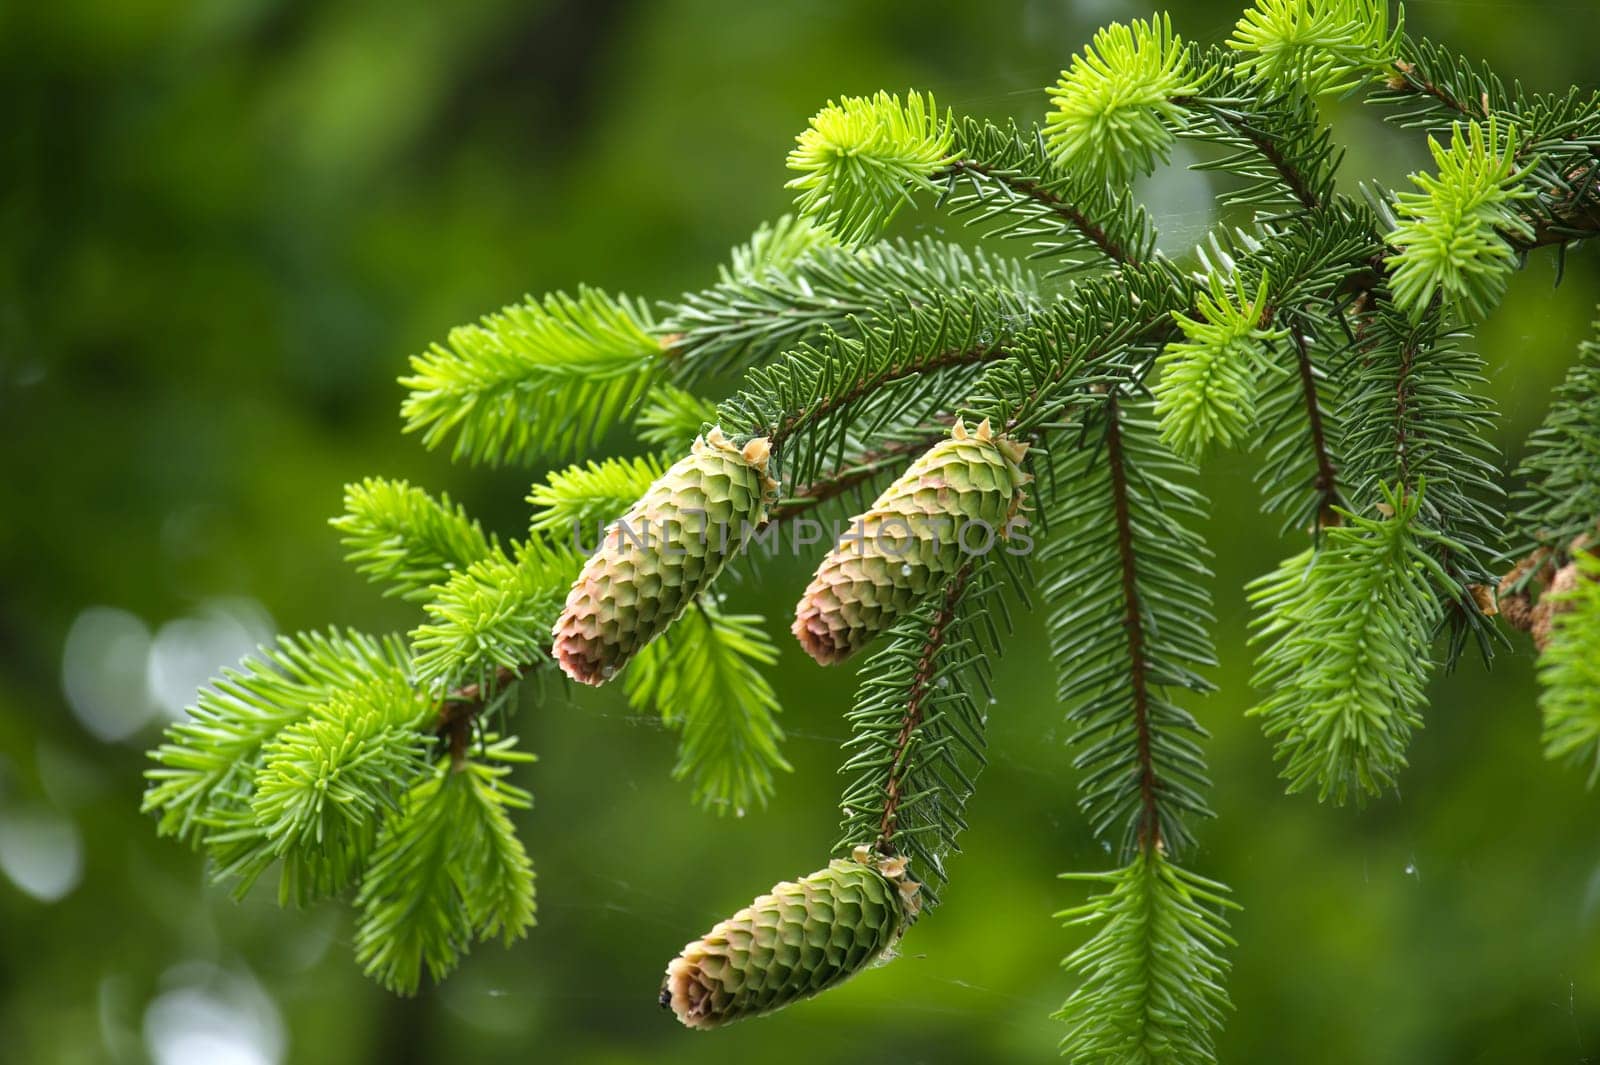 Close up of a green fir cones over blurred background by NetPix